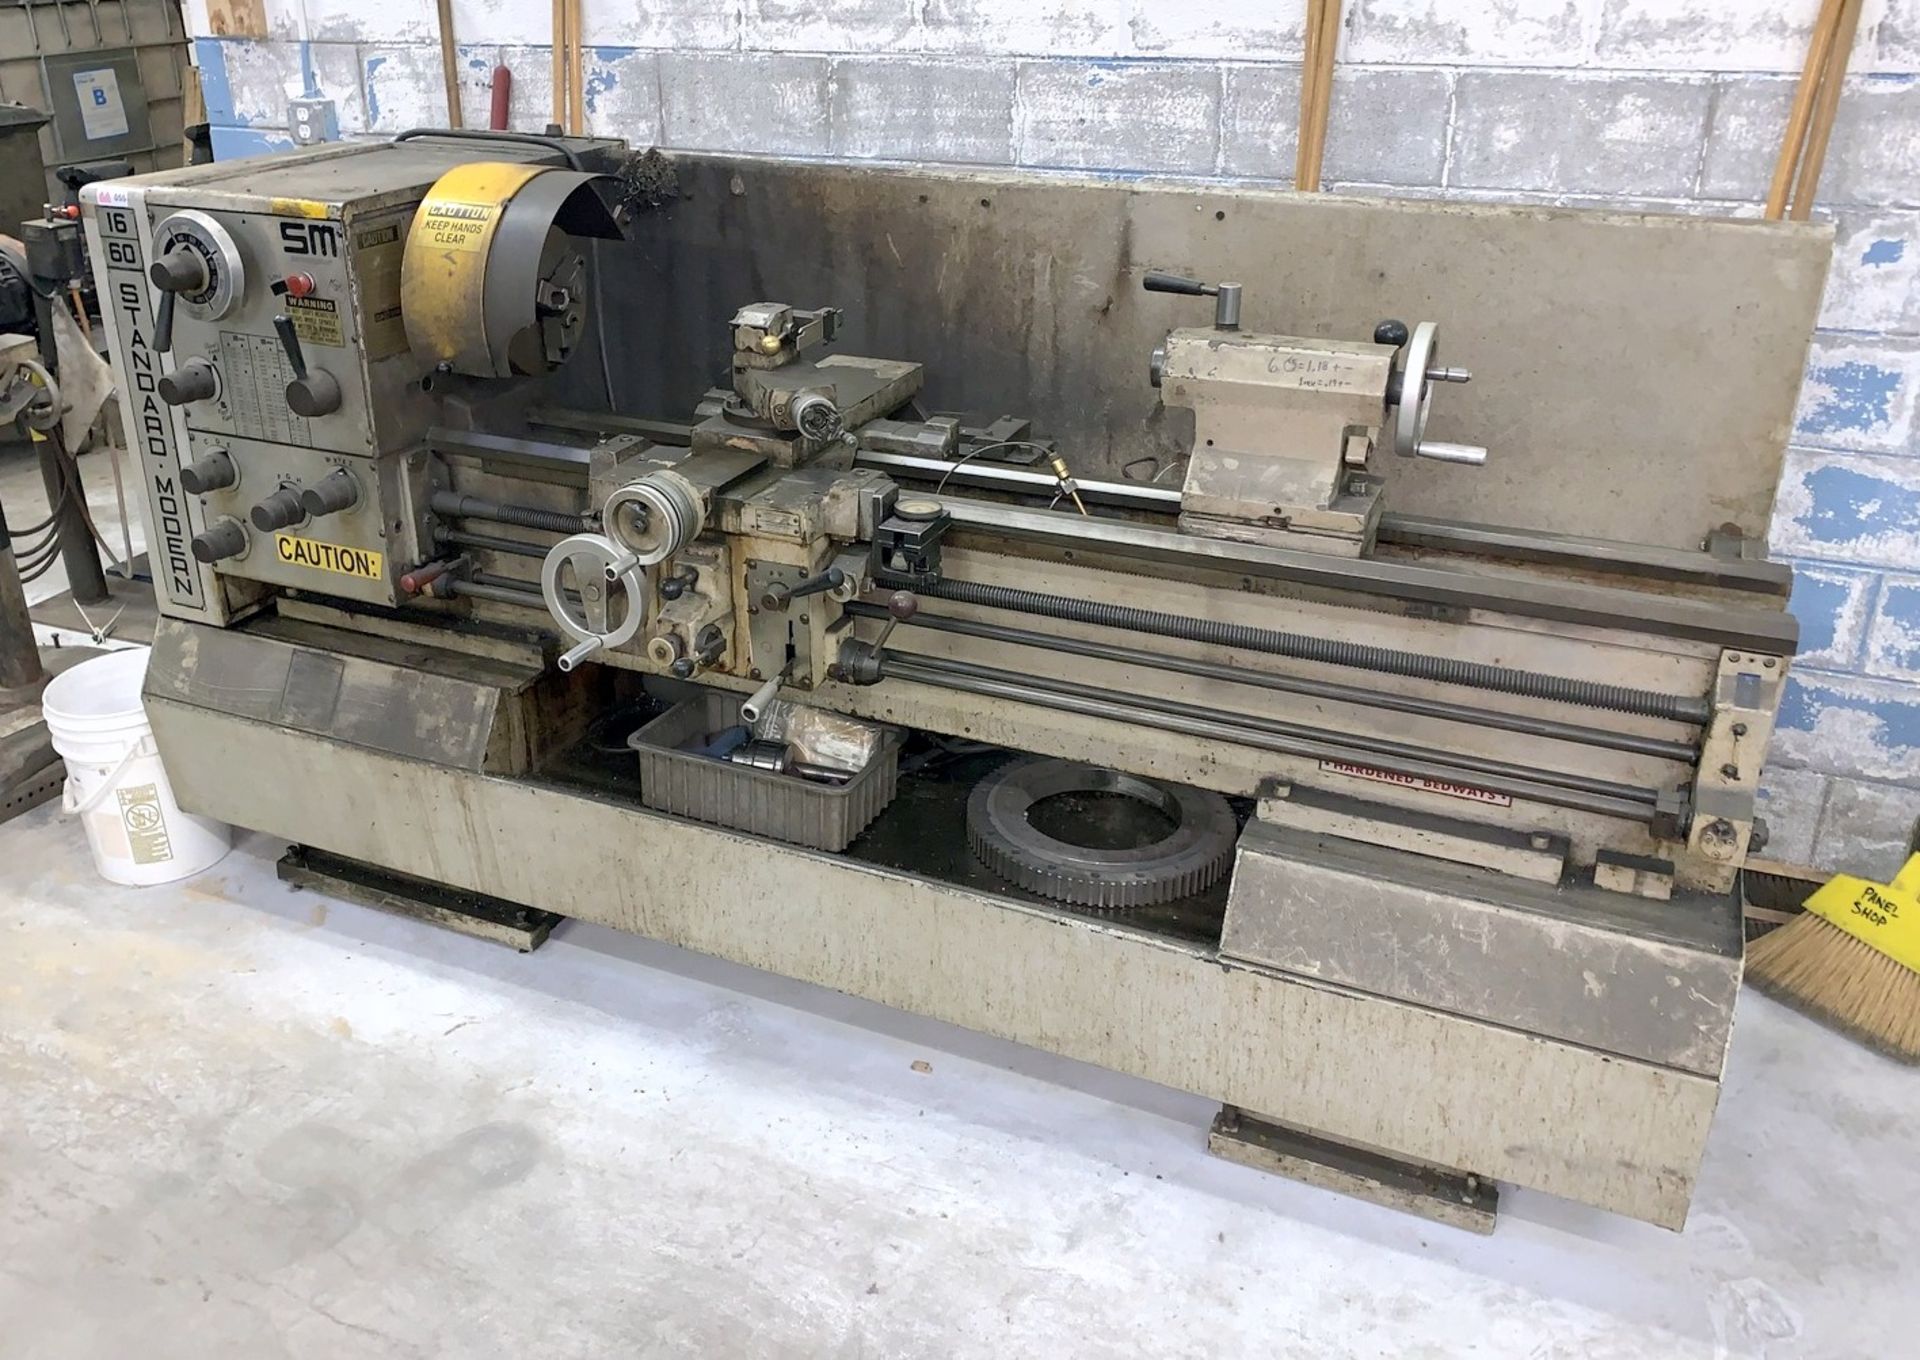 Standard Modern Lathe, 16"Diameter Swing, 60" Between Centers, Inch and Metric Threading, 40 to 2000 - Image 2 of 6